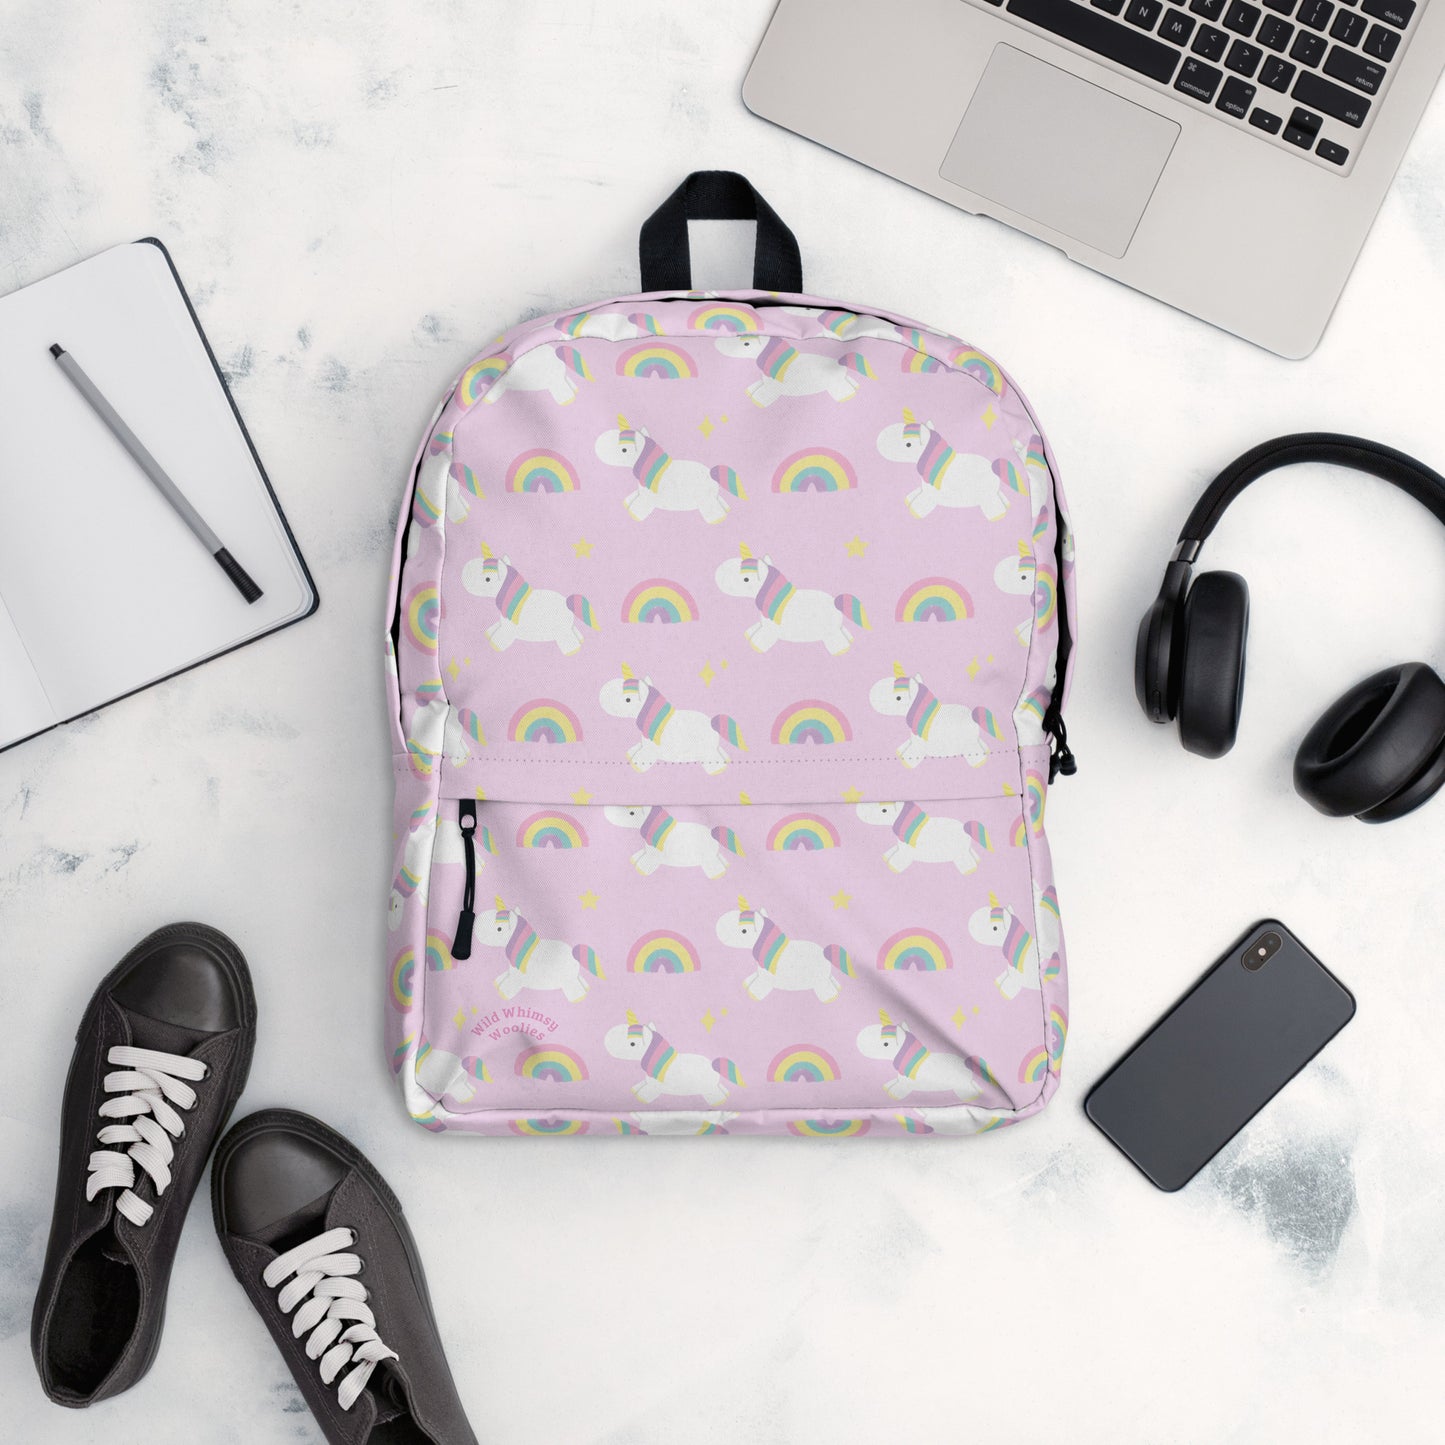 Rainbow Unicorn Backpack - Light Pink by Wild Whimsy Woolies